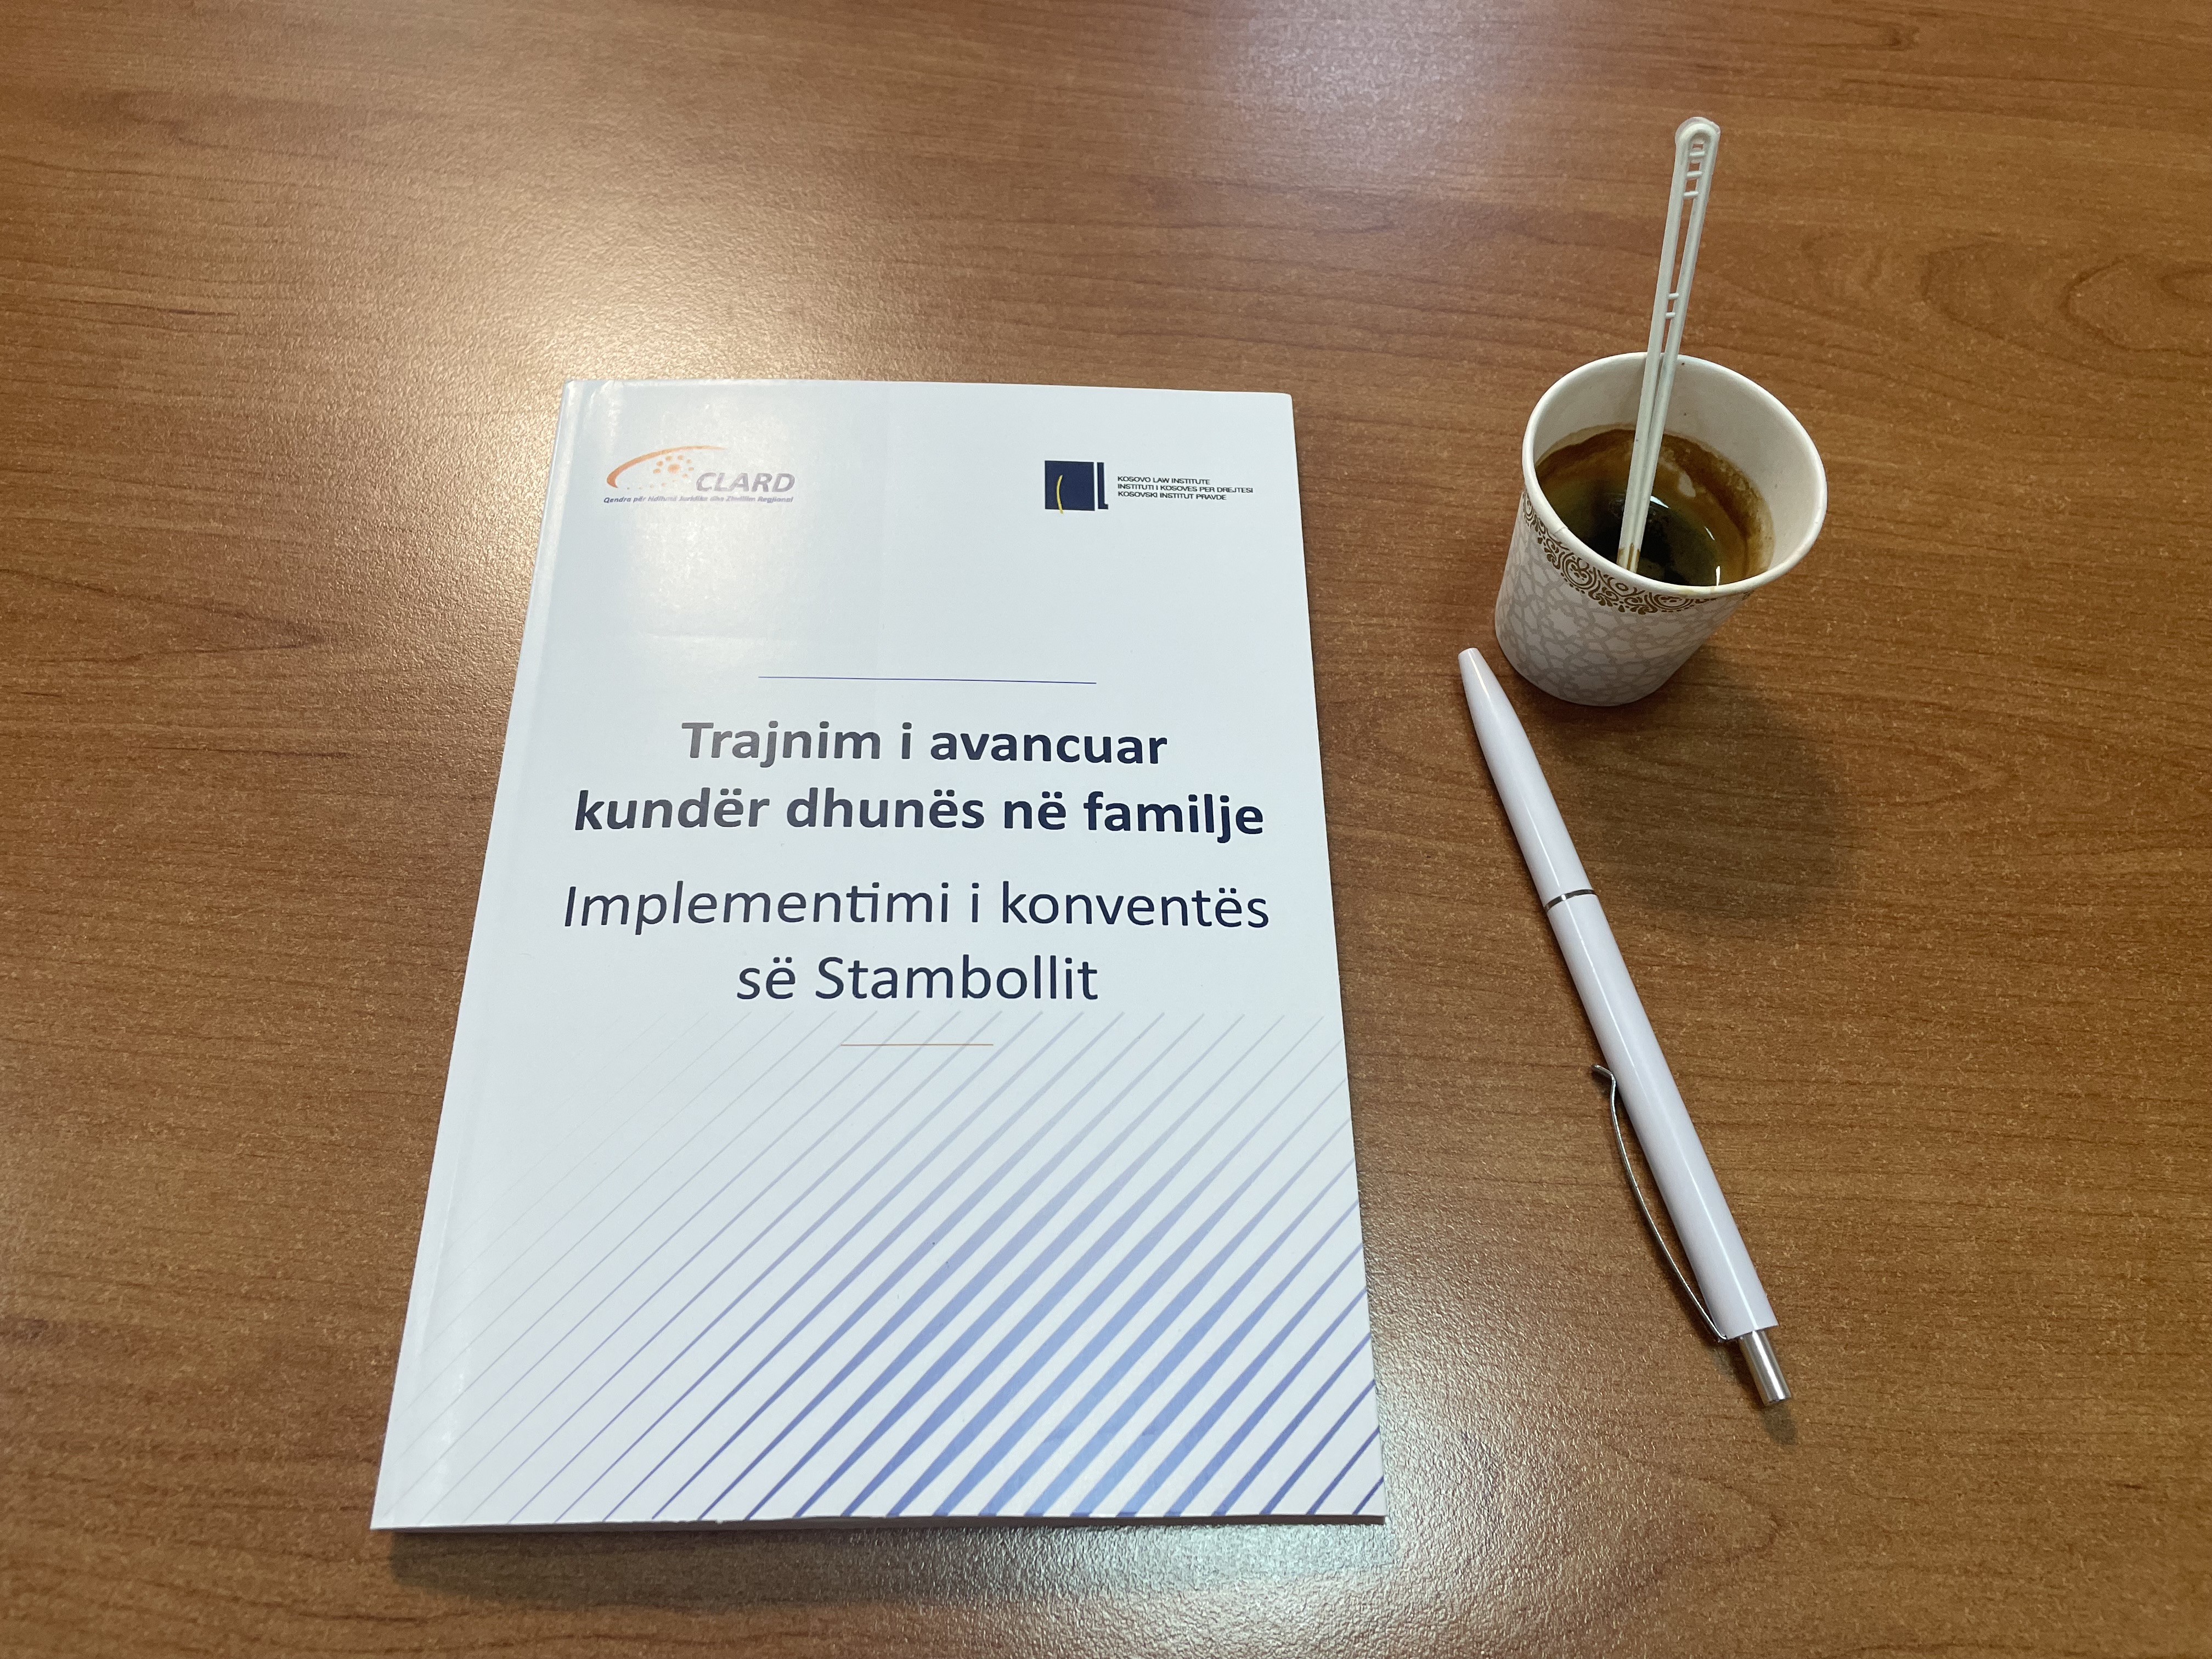 From CLARD's training at the Academy of Justice: a book with a title in Albanian that translates to "Advanced Training Against Domestic Violence, Implementation of the Istanbul Convention," a pen, and an espresso.